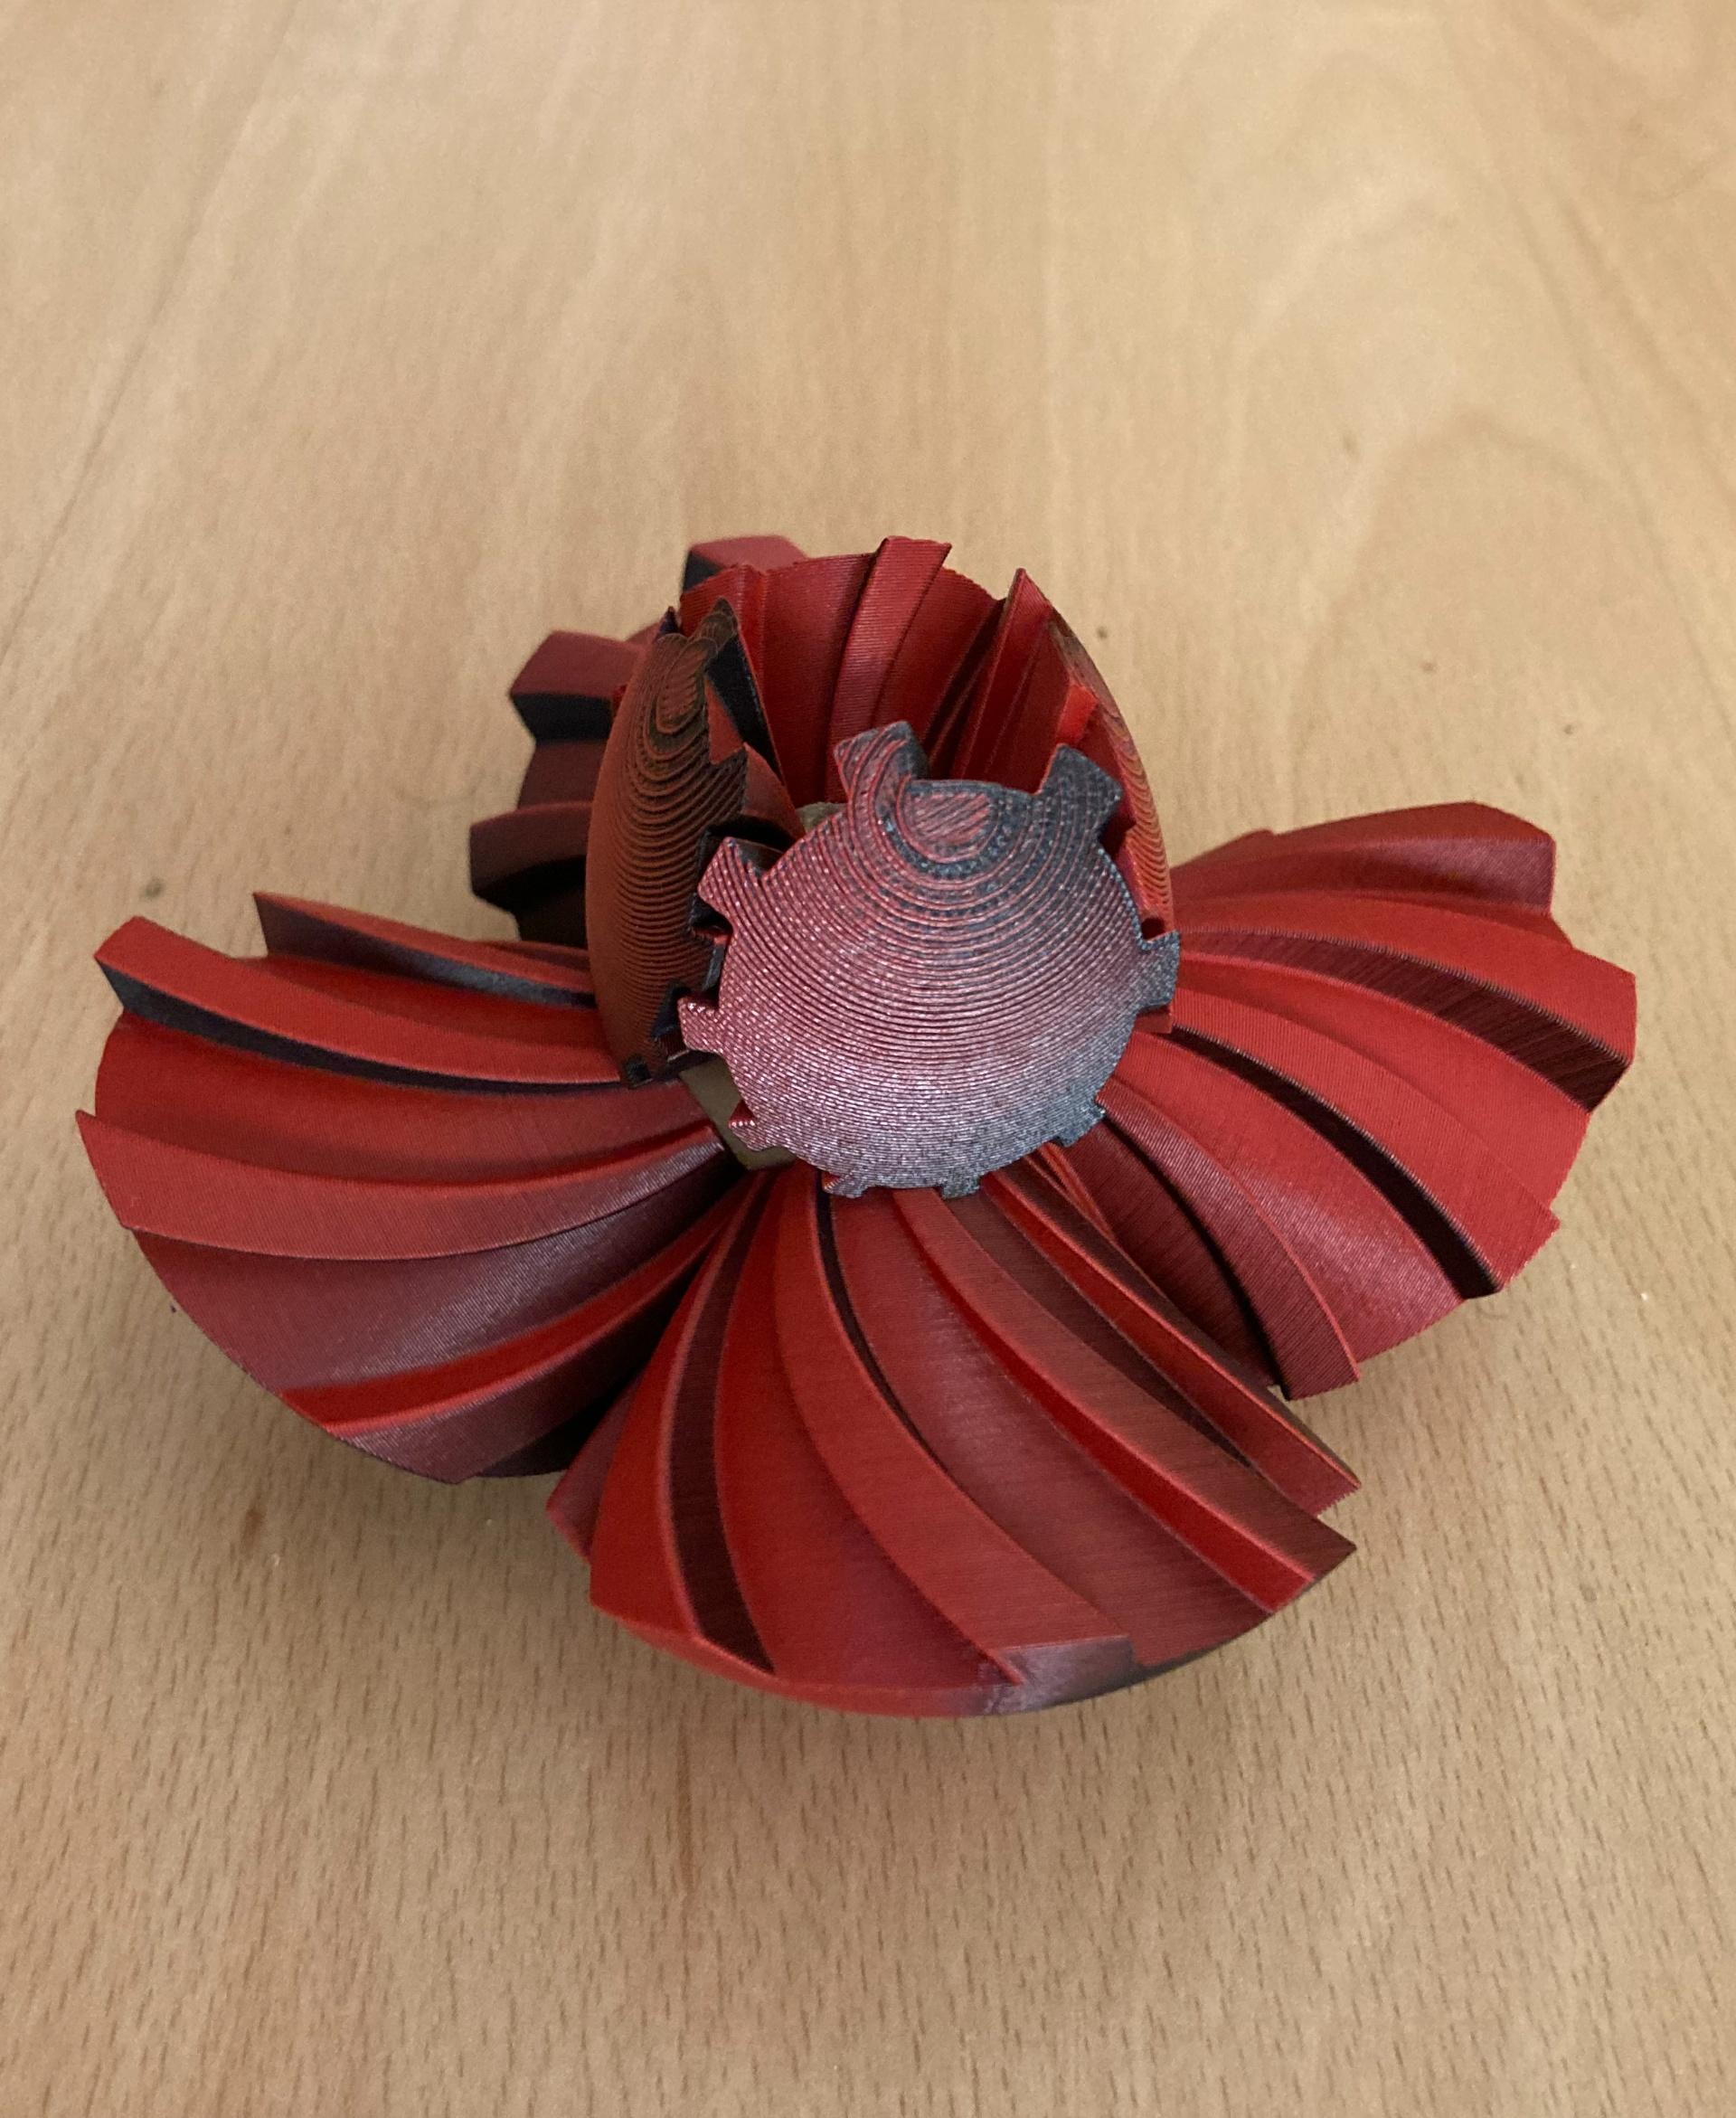 Gear Ball 2.0 - Printed in Polymaker PLA PolyTerra, heart and pins in ColorFabb PLA/PHA which is more flexible, does not "snap break" and also more slick so no need for any lubricant. All fits just right with basic pins. Thank you. Printed on Prusa MK4 with inputShaper 0.2mm structural - 3d model